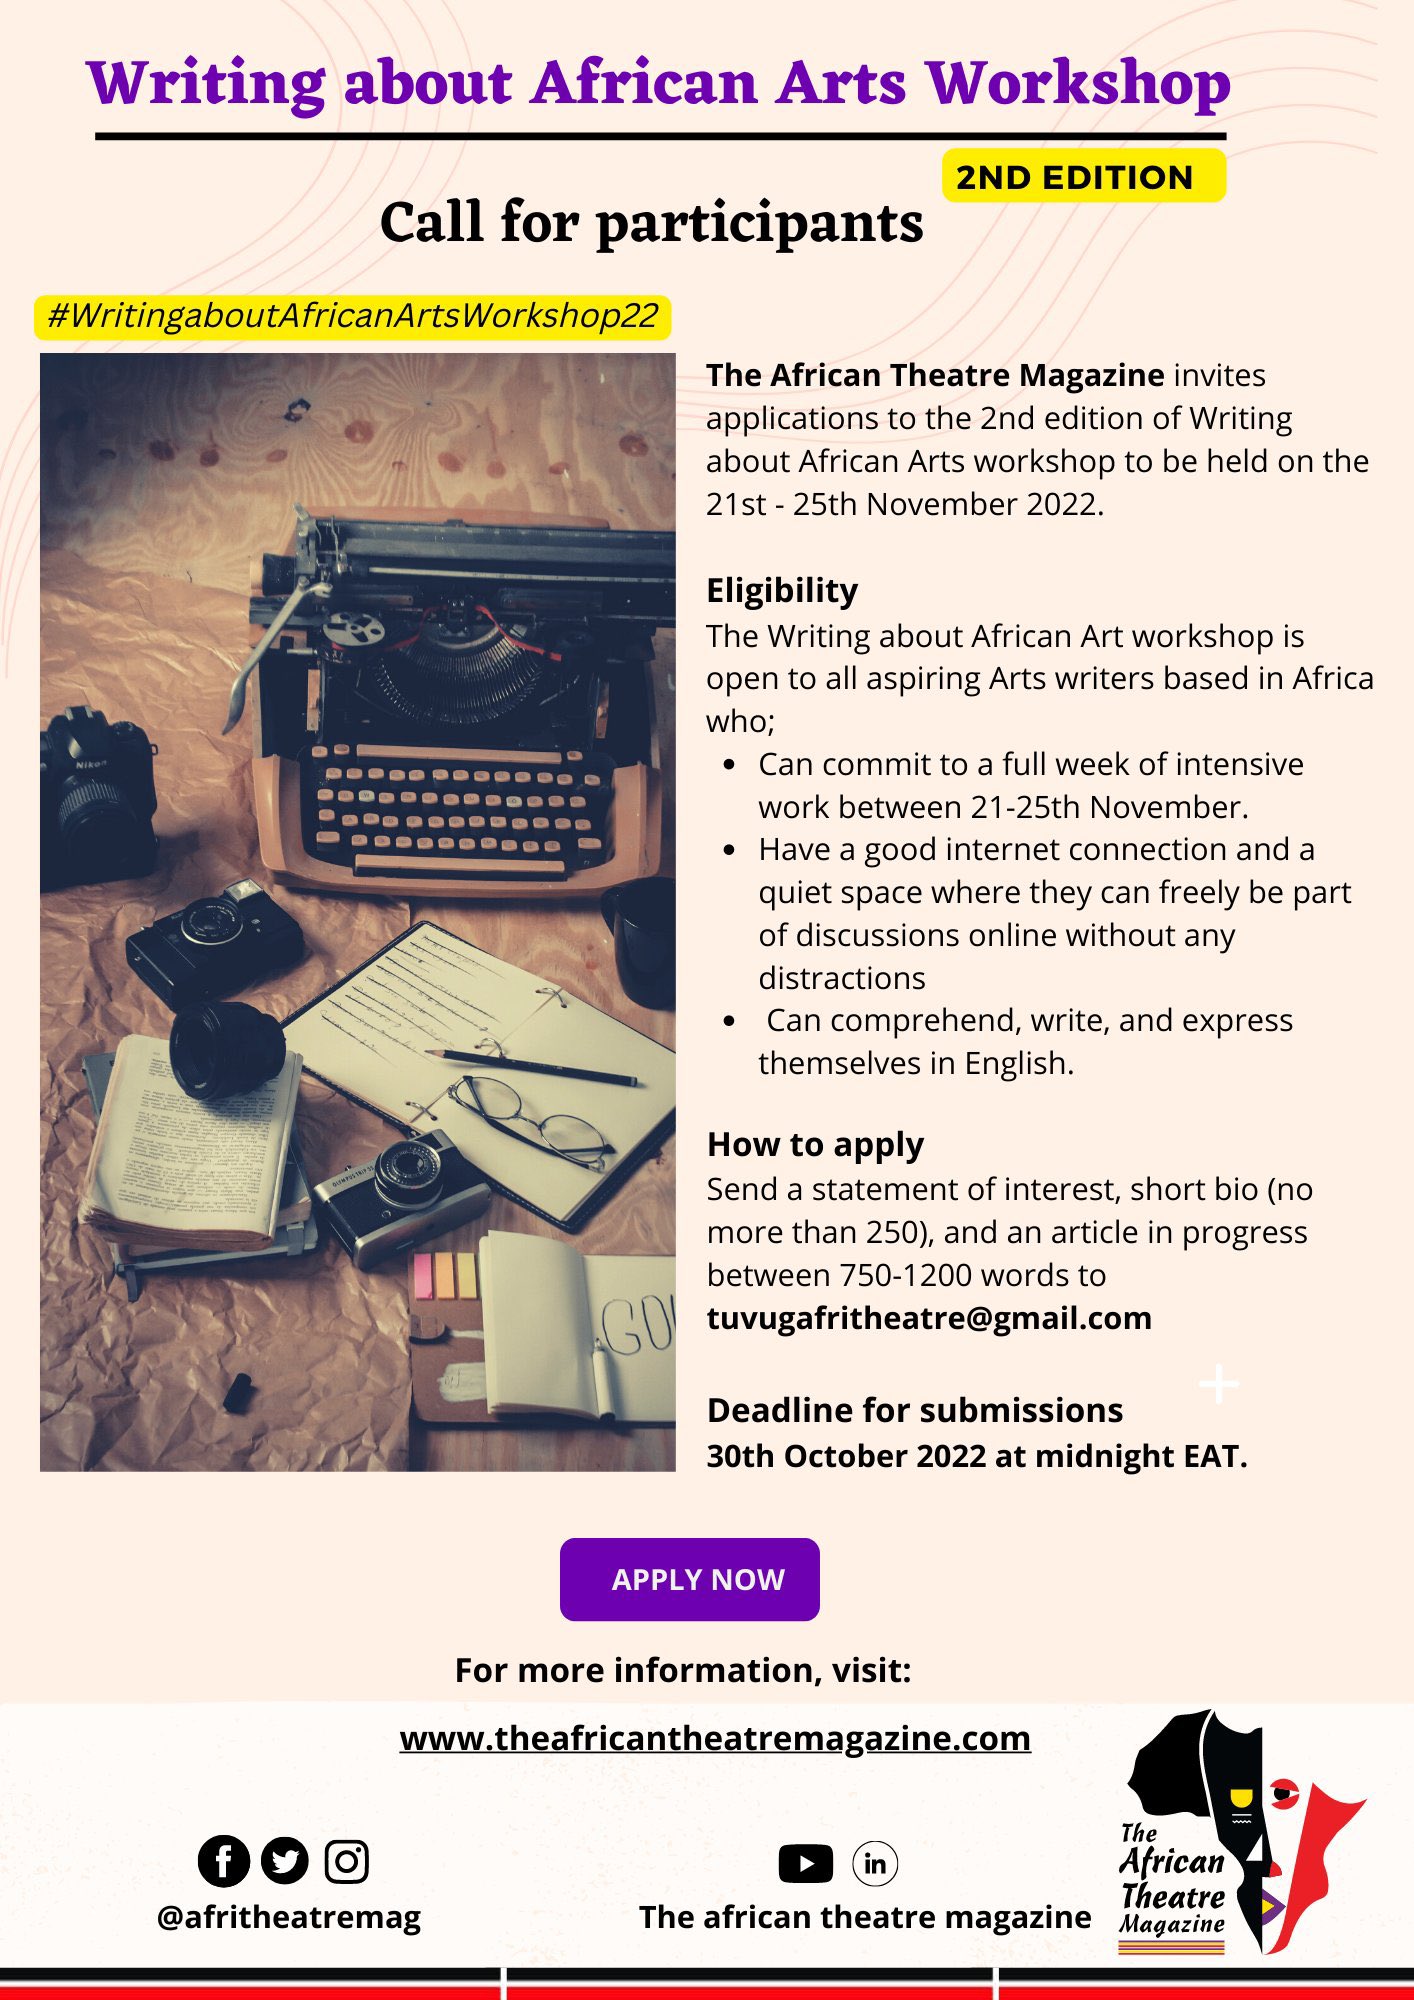 The second edition of the Writing about African Arts is organised by The African Theatre Magazine. 